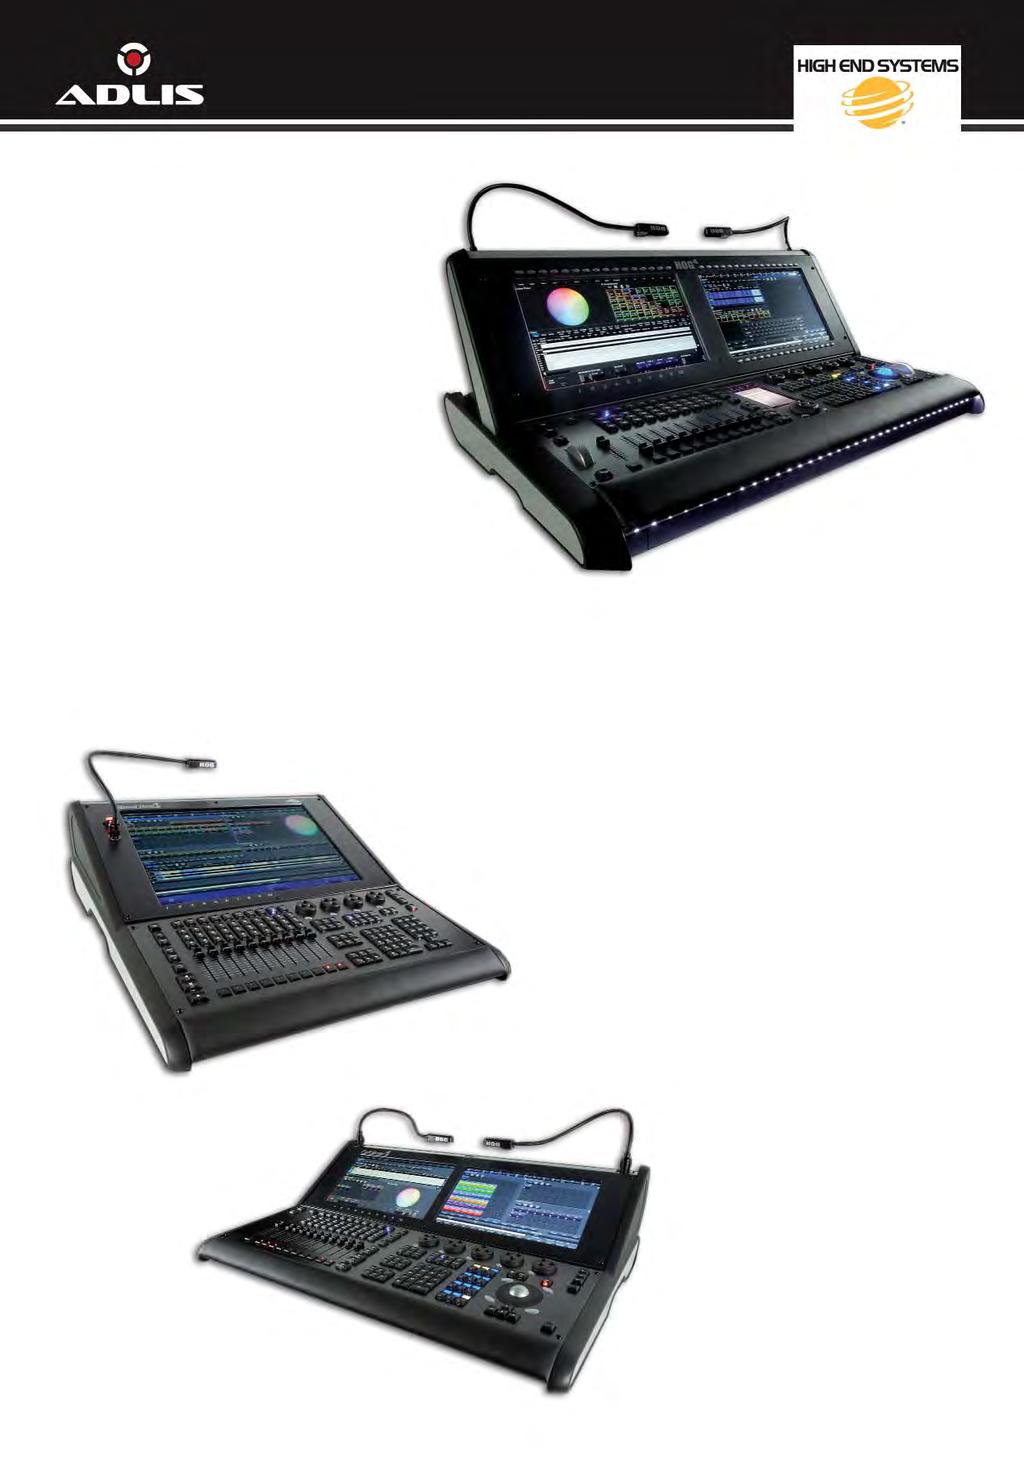 Robust Hog 4 Operating Software:. Unlimited number of simultaneous crossfades.. Two internal 17-inch wide screen touchscreens with 10 point multi-touch.